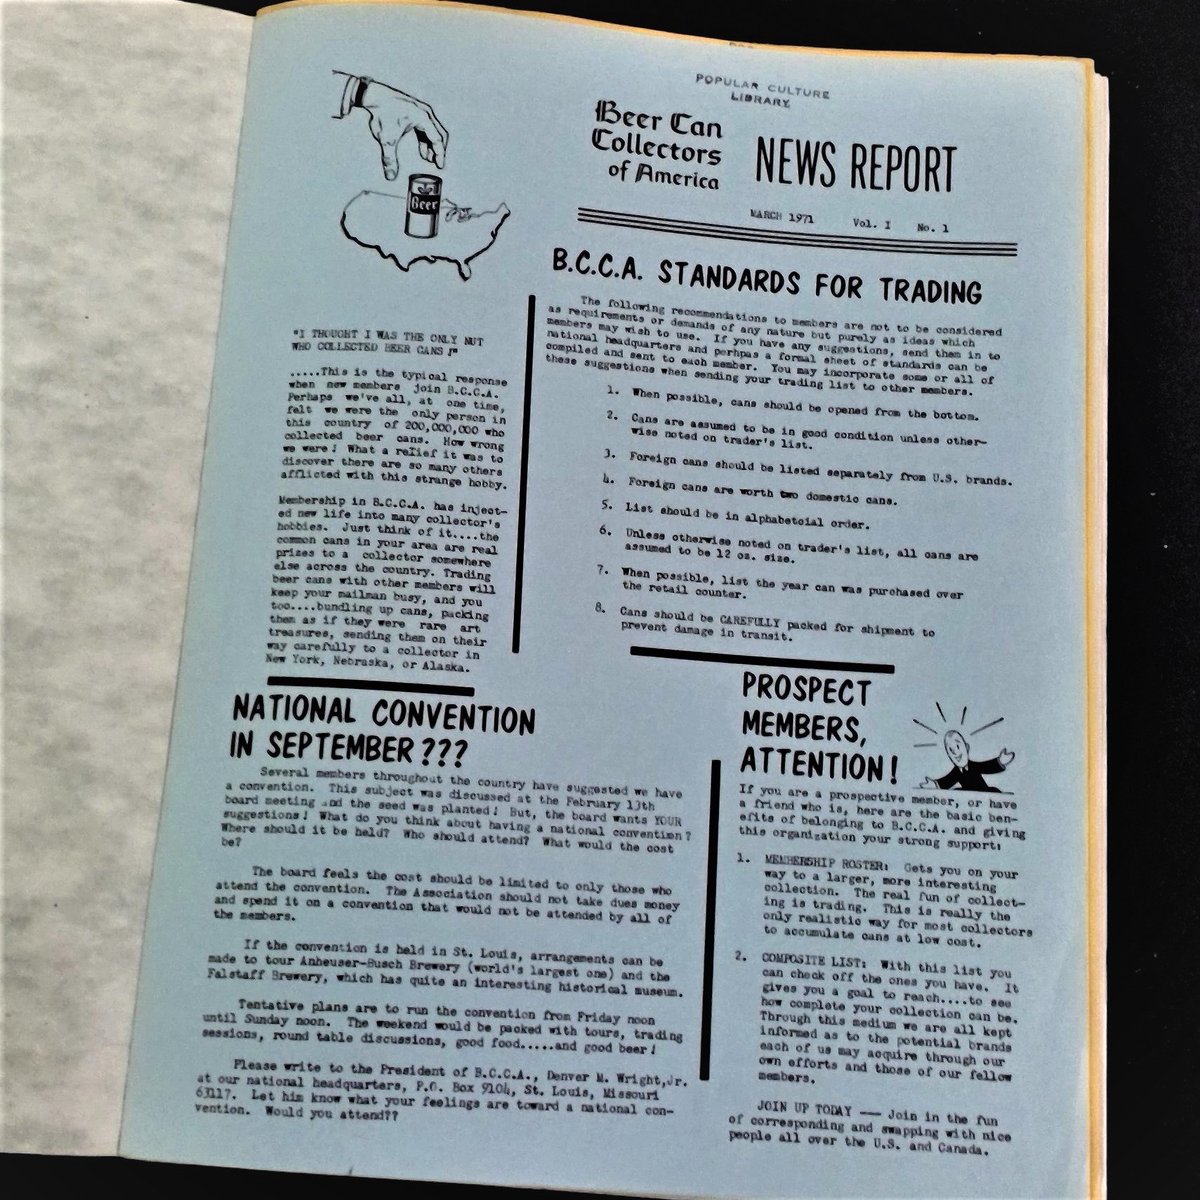 Collecting culture and beer culture have long gone hand in hand. The Beer Can Collectors of America formed in 1970 to share their love of breweriana. Here is the front page from their first newsletter, in March 1971.  #InternationalBeerDay